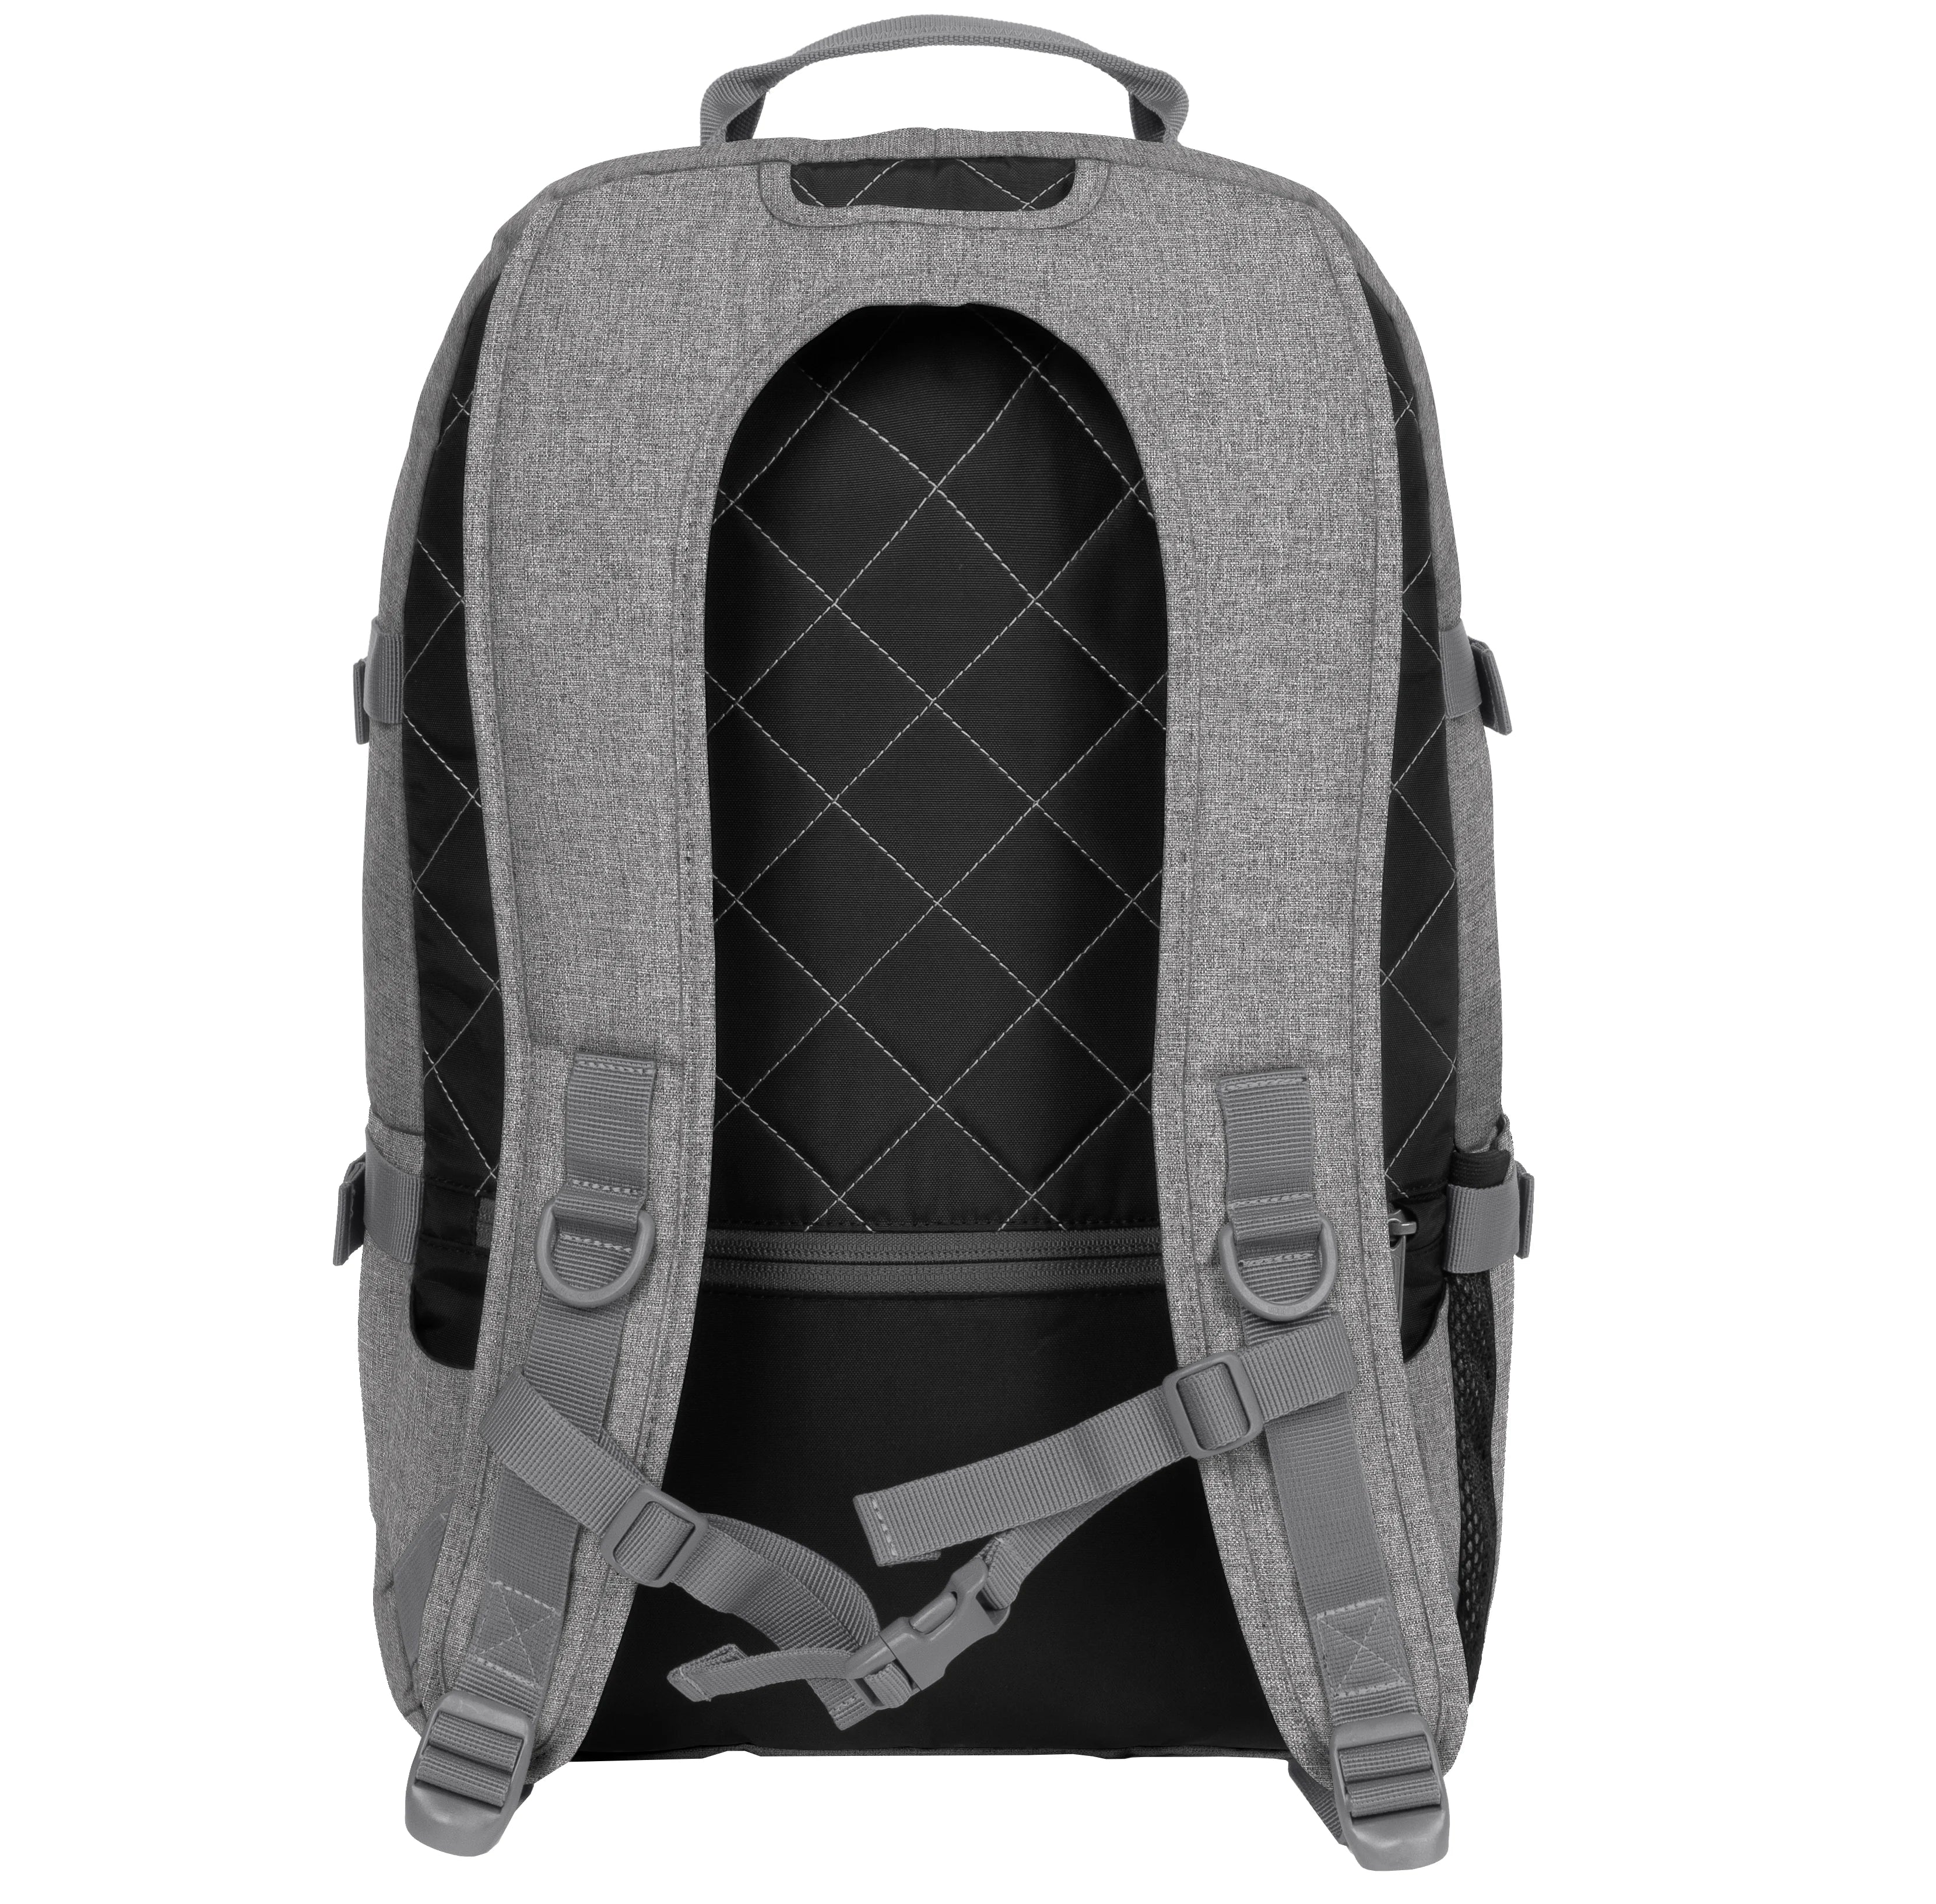 Eastpak Core Series Volker backpack with notebook compartment 49 cm - CS Mono Army